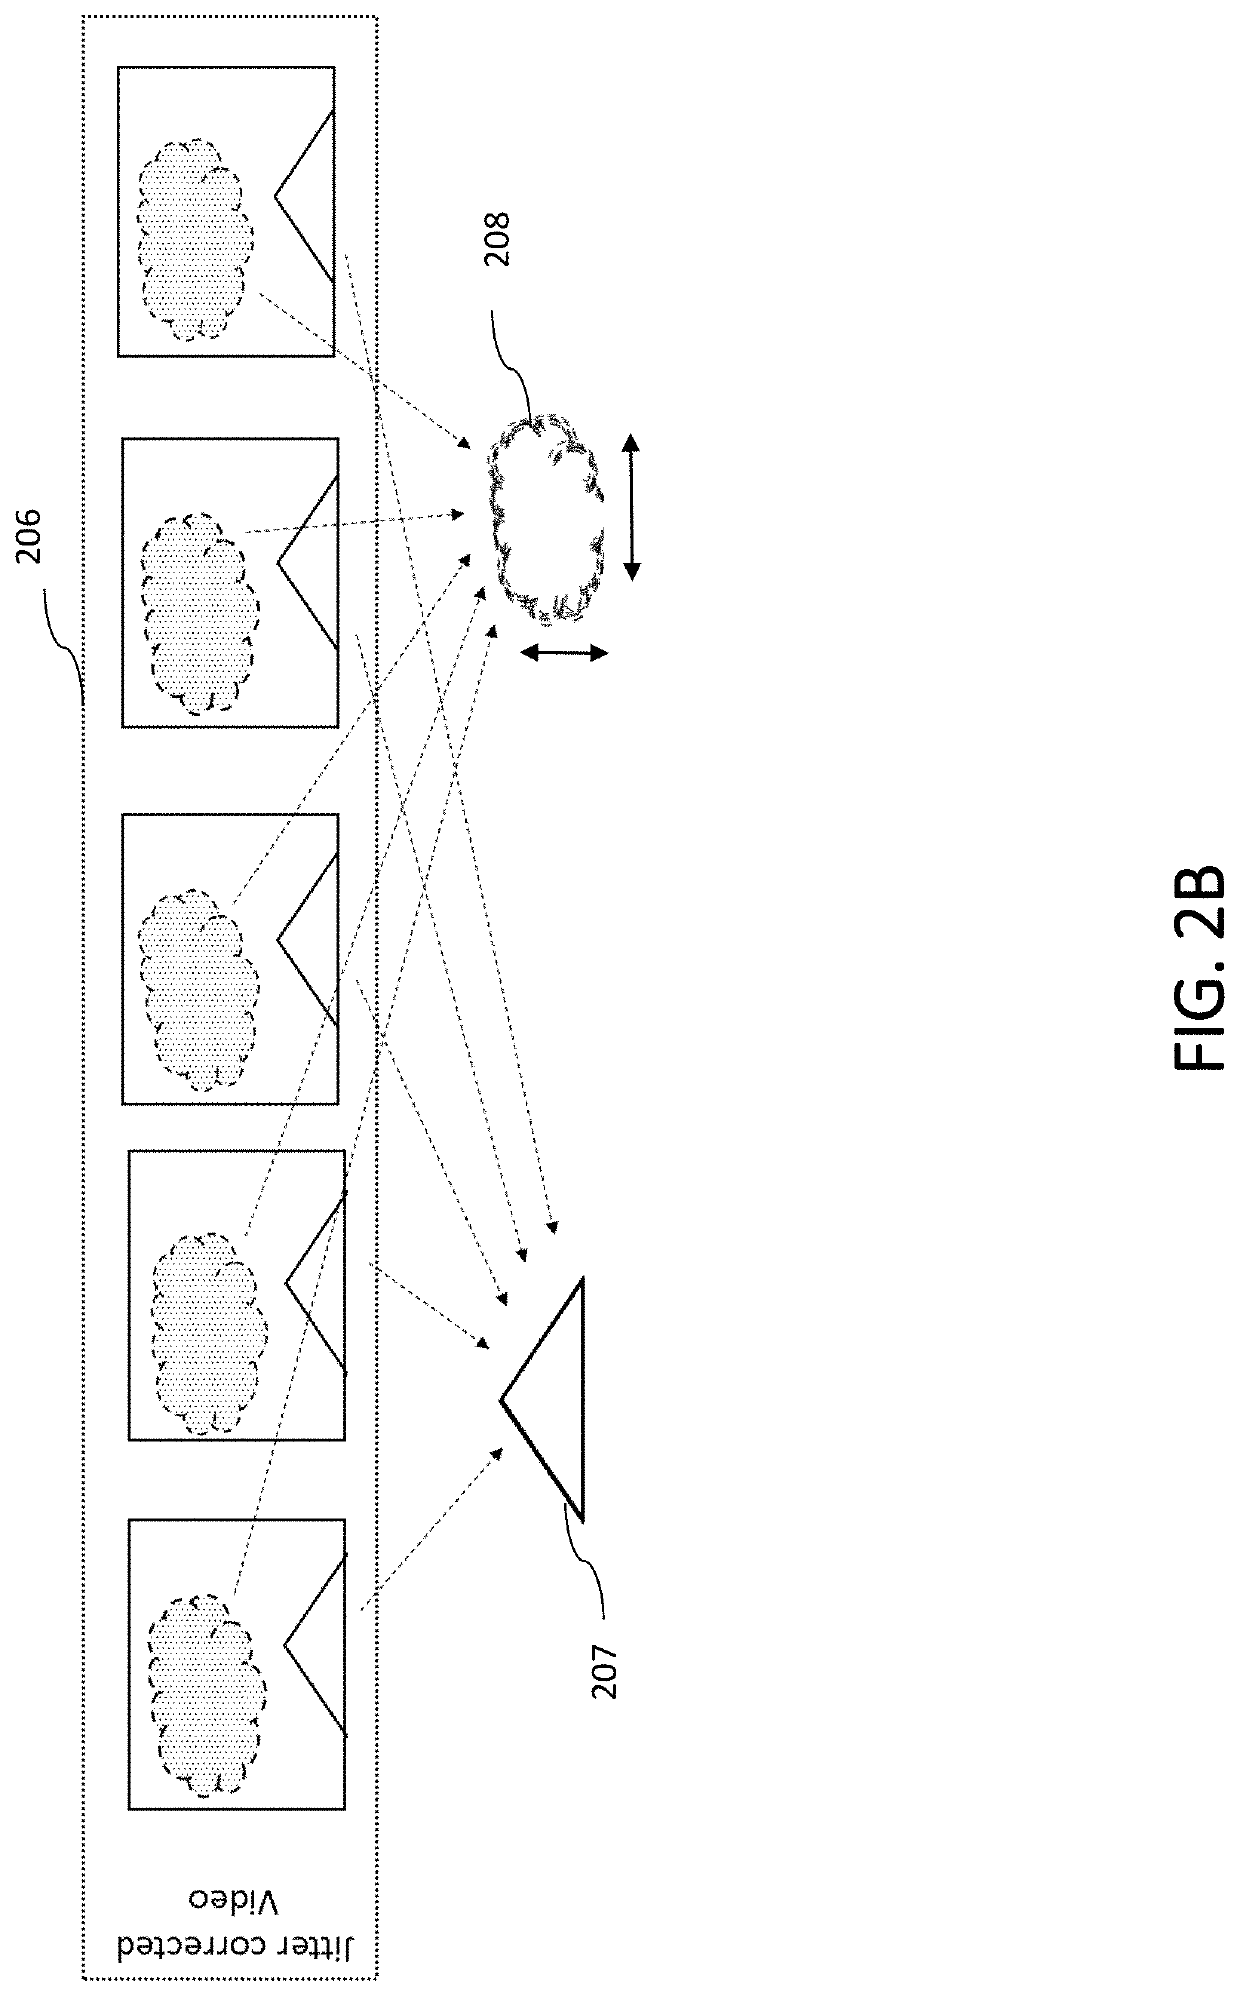 Apparatus and methods for pre-processing and stabilization of captured image data